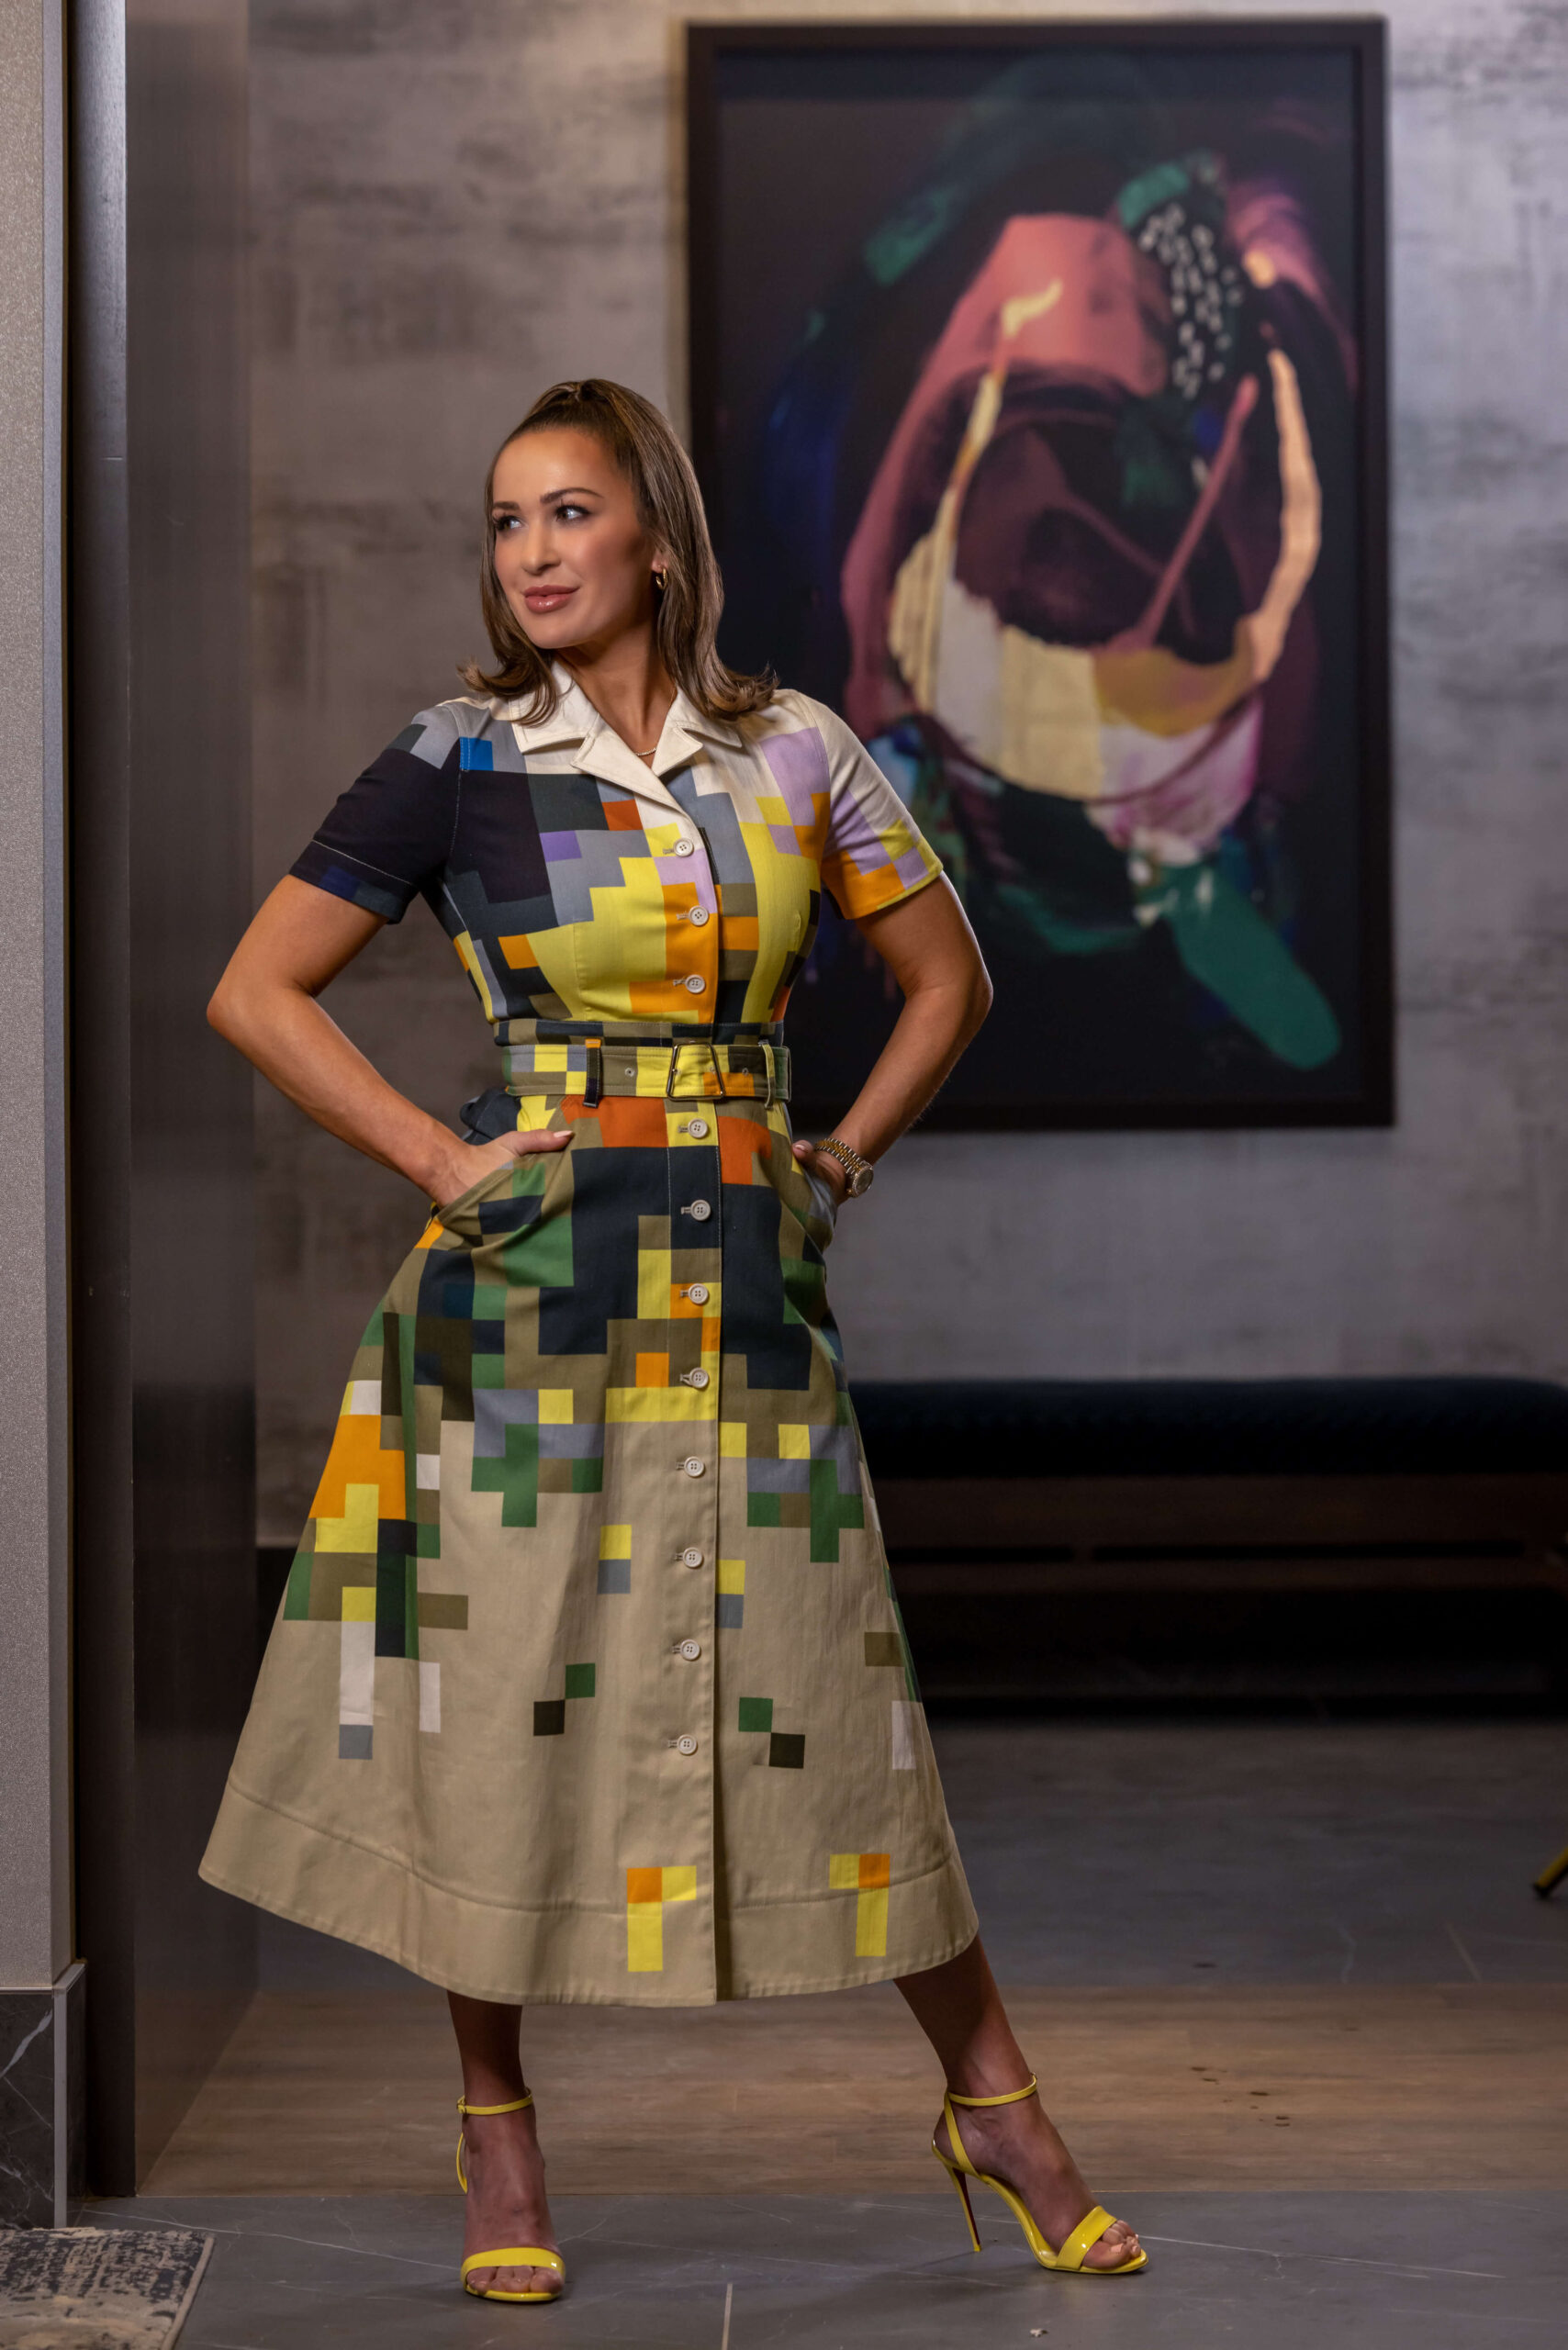 woman in stylish pixel dress posing with hands on hips against abstract art work on wall